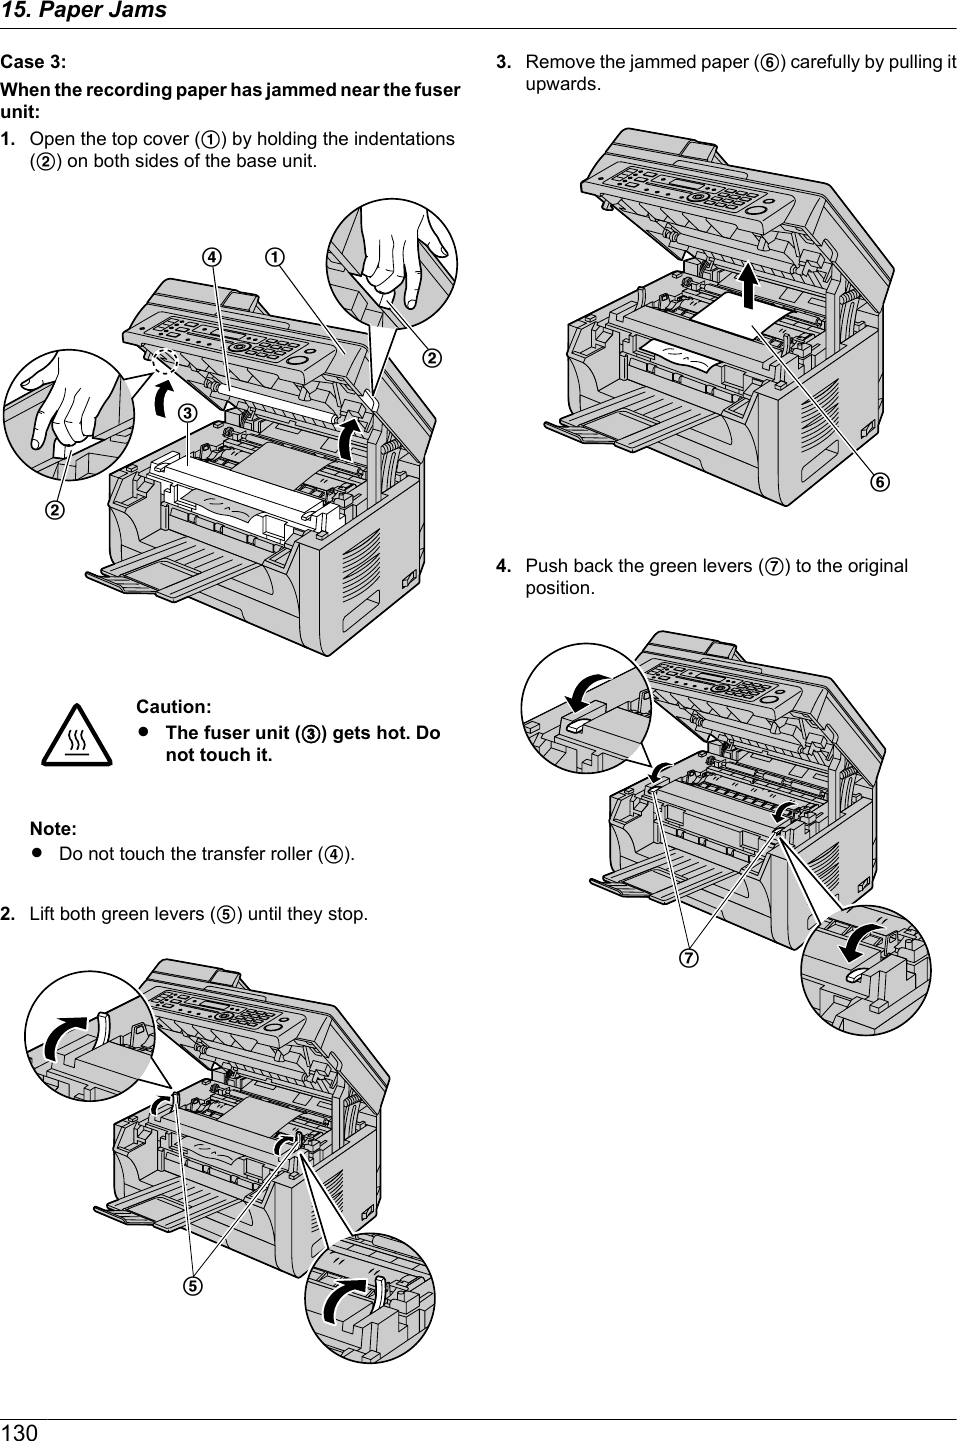 Case 3:When the recording paper has jammed near the fuserunit:1. Open the top cover (A) by holding the indentations(B) on both sides of the base unit.DABBCCaution:RThe fuser unit (C) gets hot. Donot touch it.Note:RDo not touch the transfer roller (D).2. Lift both green levers (E) until they stop.E3. Remove the jammed paper (F) carefully by pulling itupwards.F4. Push back the green levers (G) to the originalposition.G13015. Paper Jams